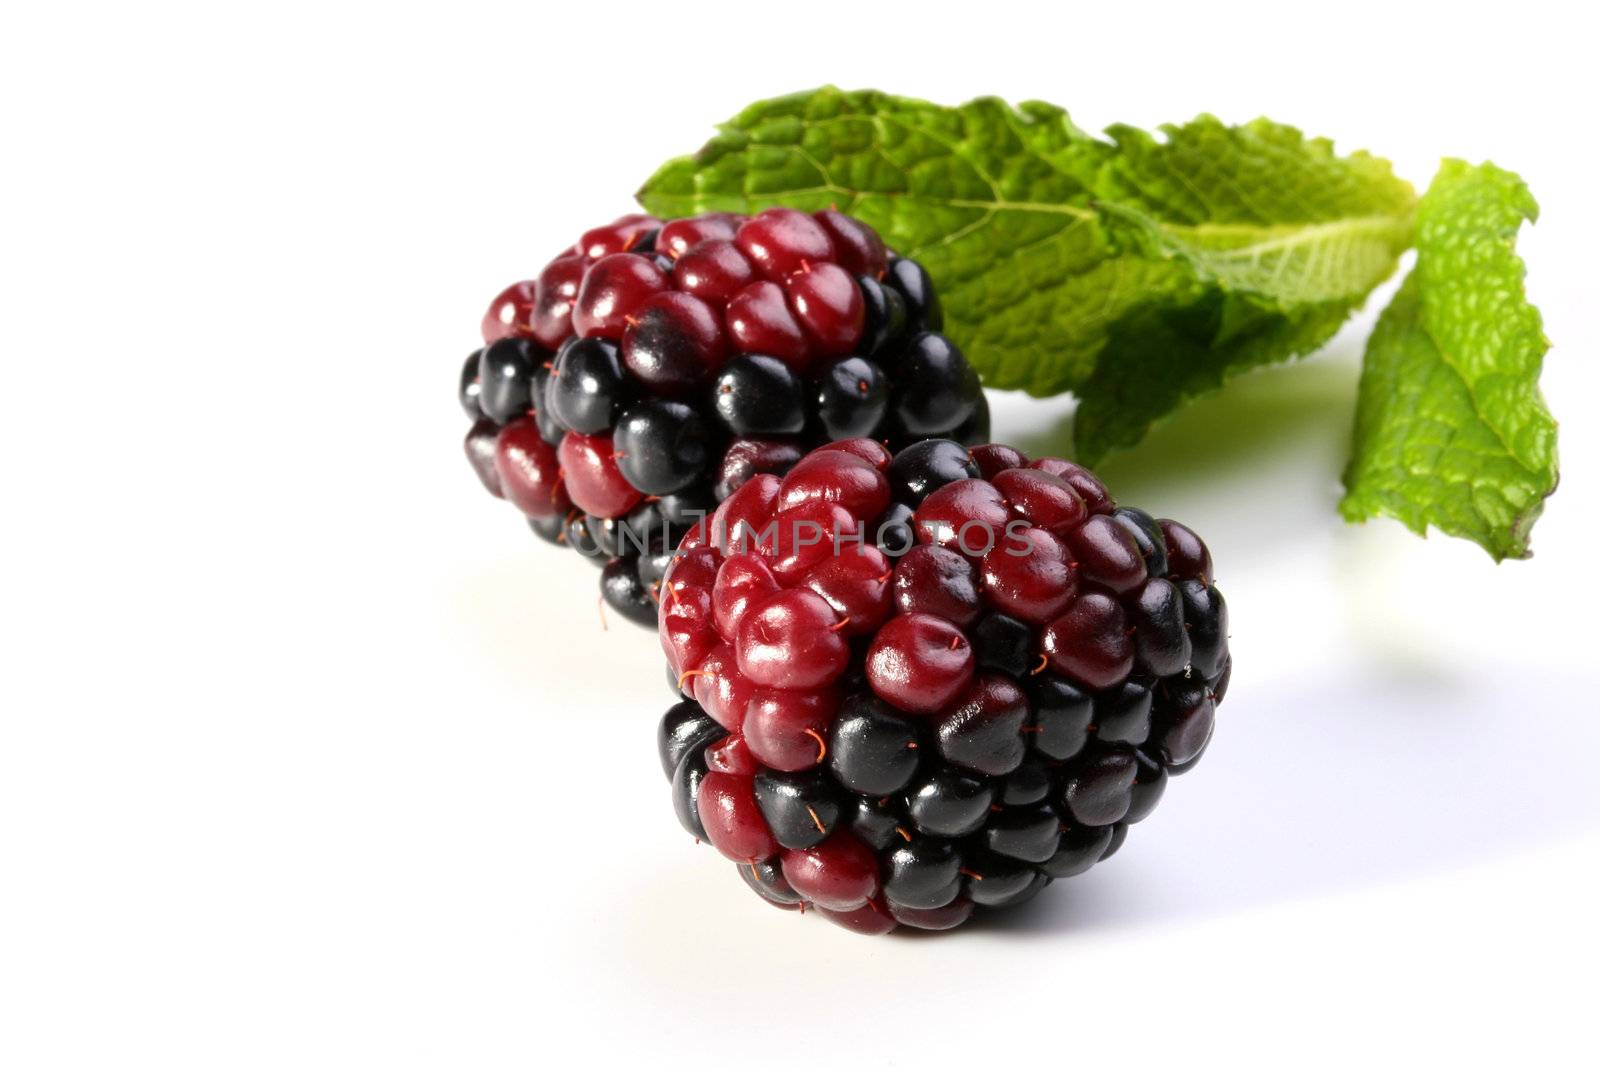 Two berries of a blackberry with green leaves of mint.